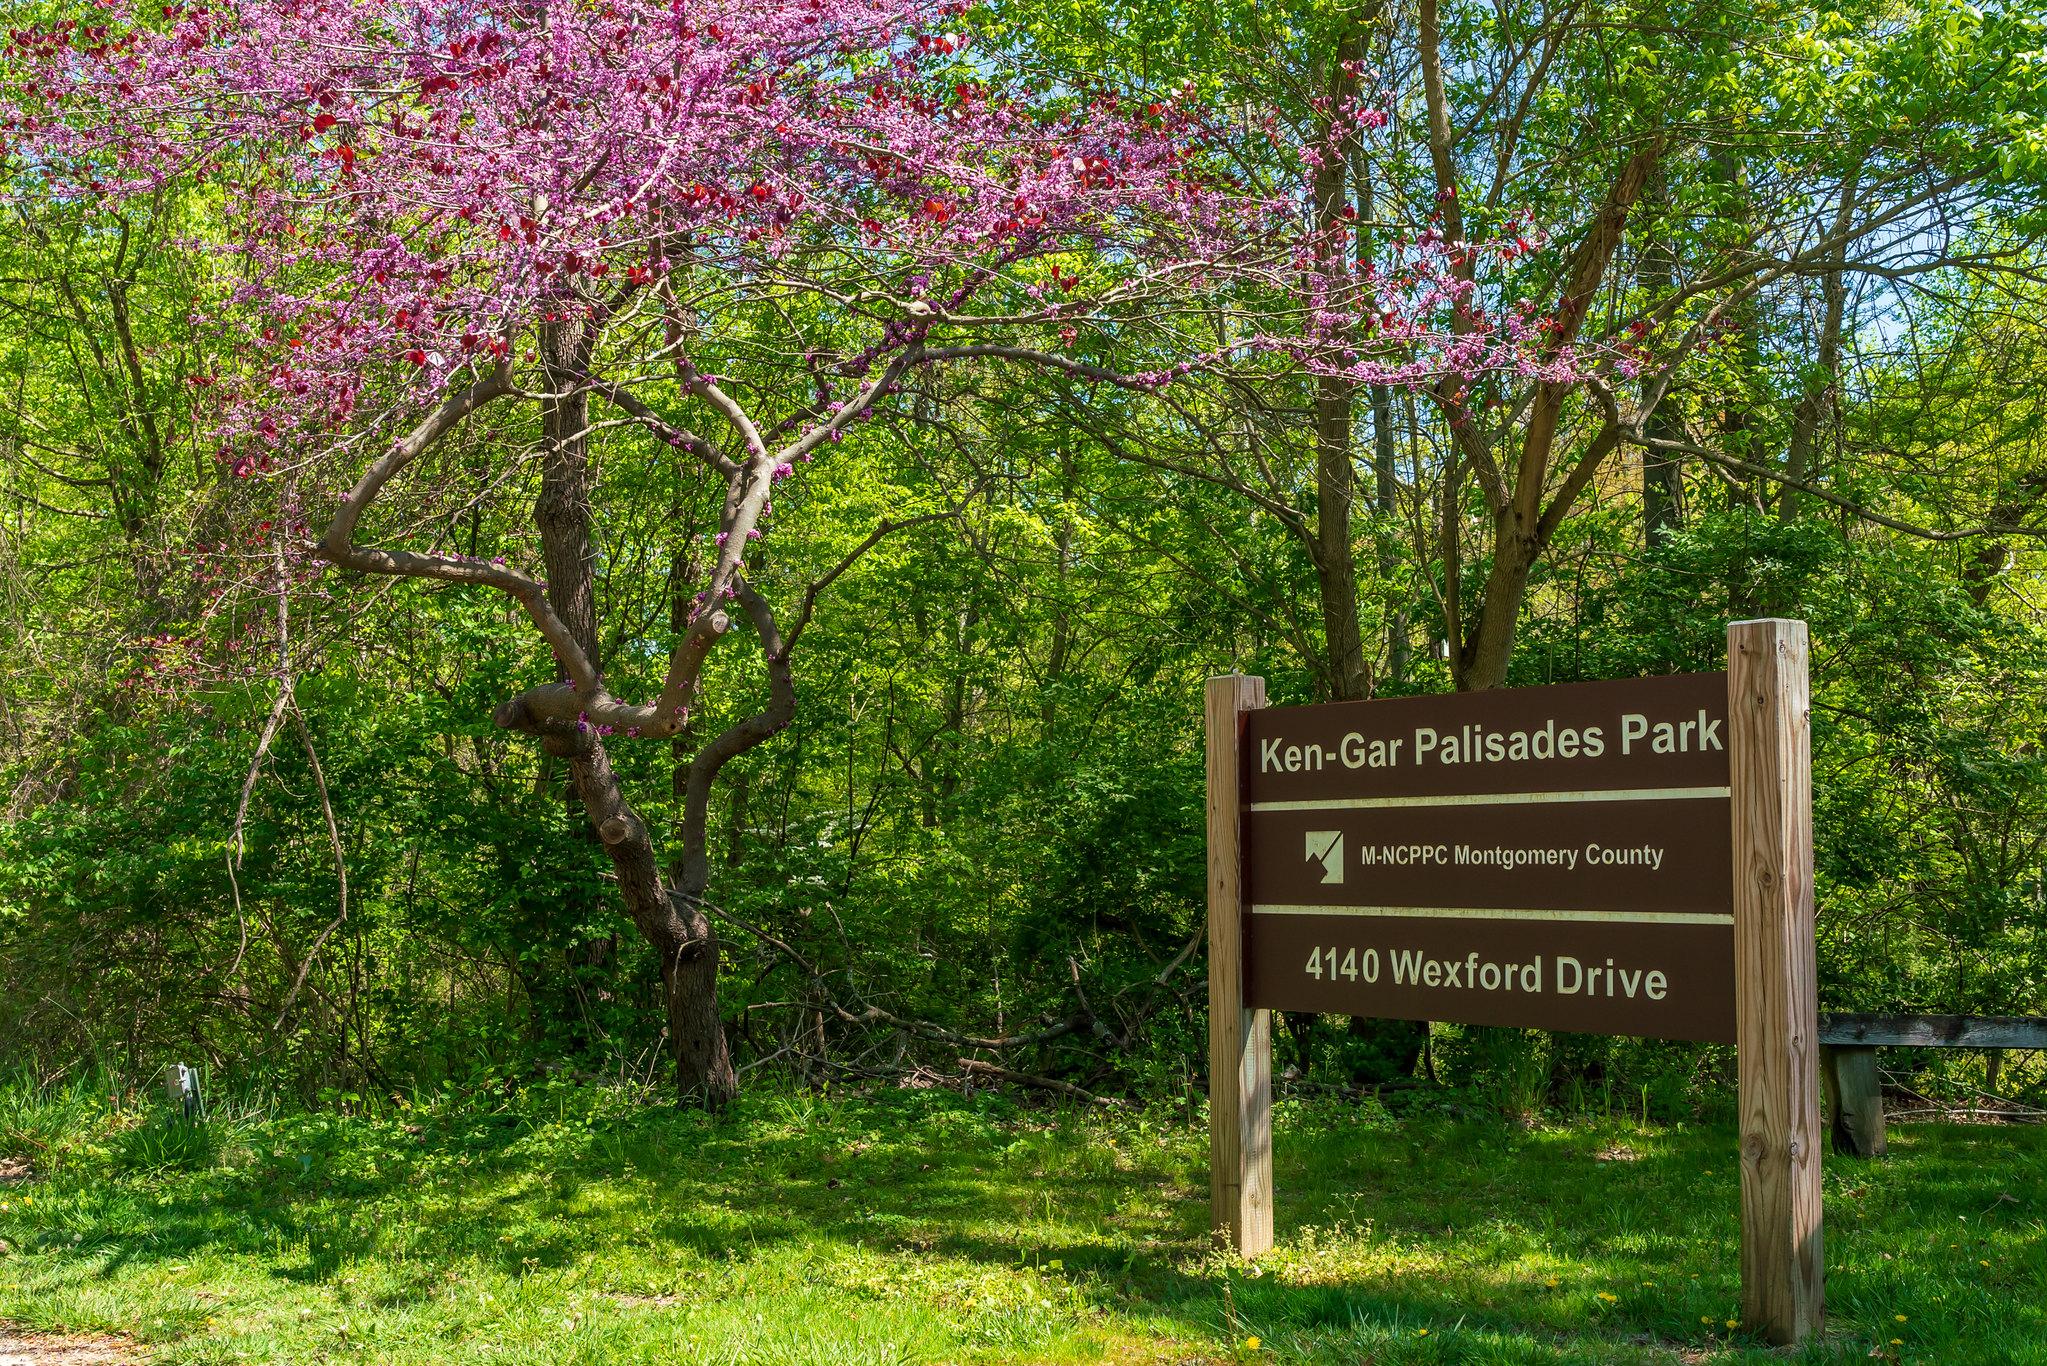 Ken-Gar Palisades Park brown and white sign next to a purple eastern redbud tree.